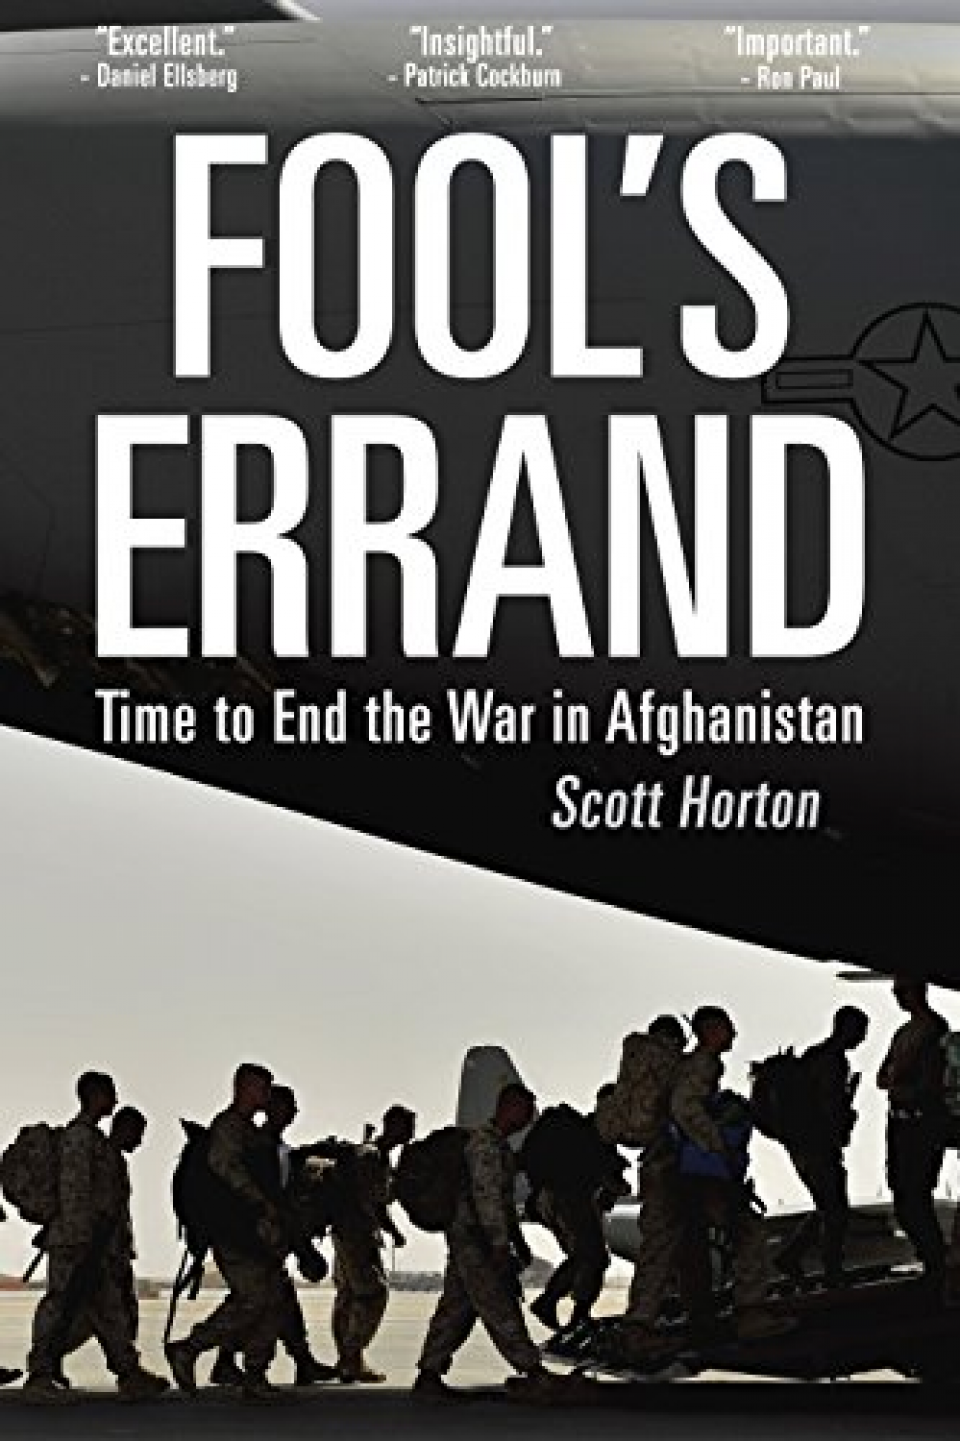 Book: Fool's Errand: Time to End the War in Afghanistan